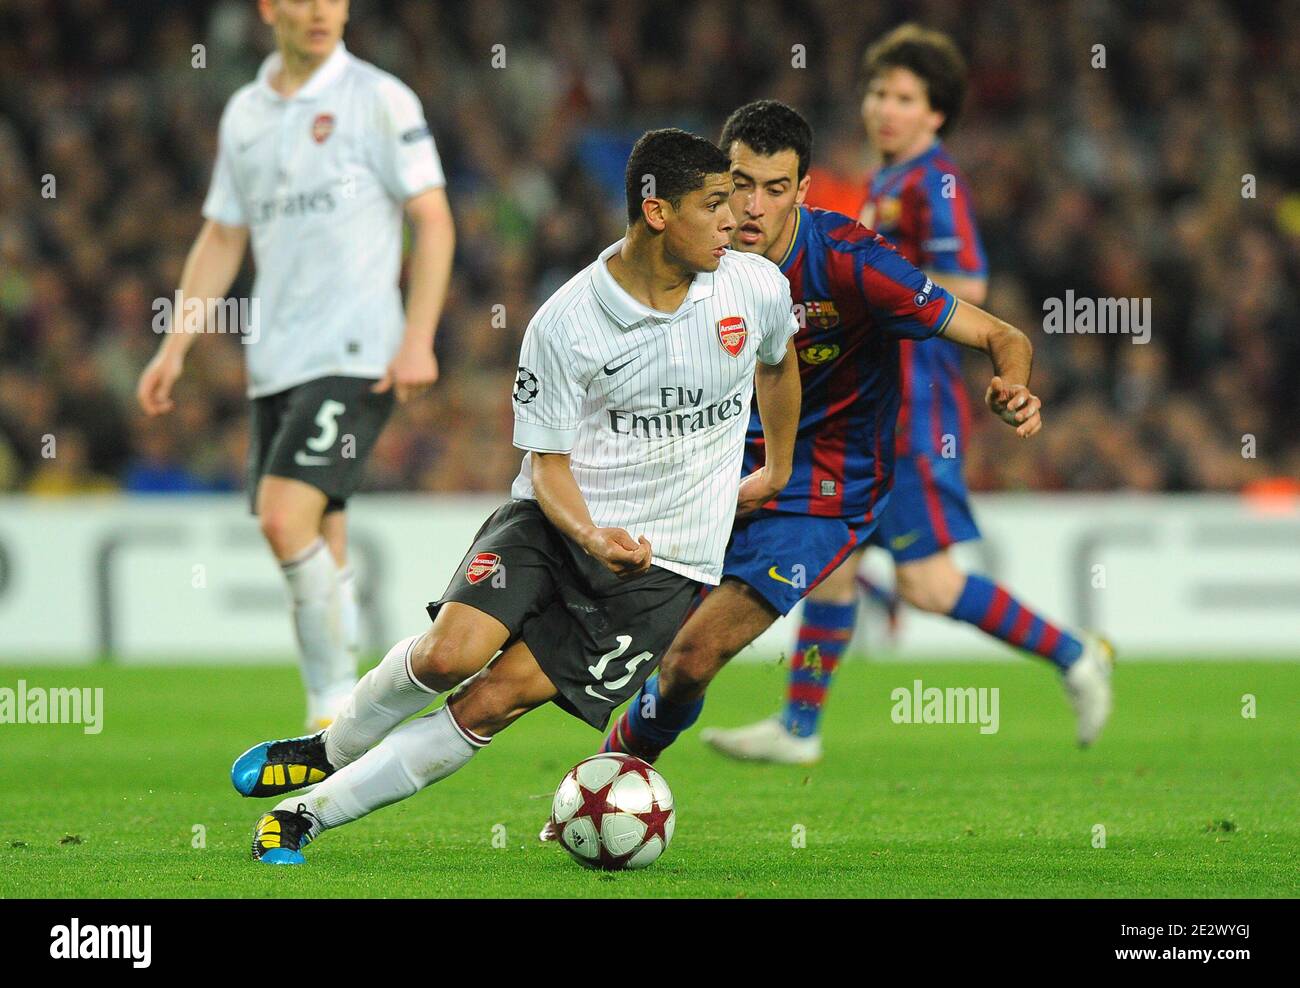 Arsenal'S Denilson During The Uefa Champions League,Quarter Final, Second  Leg Soccer Match, Fc Barcelona Vs Arsenal At Nou Camp In Barcelona, Spain  On March 6, 2010. Barcelona Beat Arsenal 4-1 To Reach